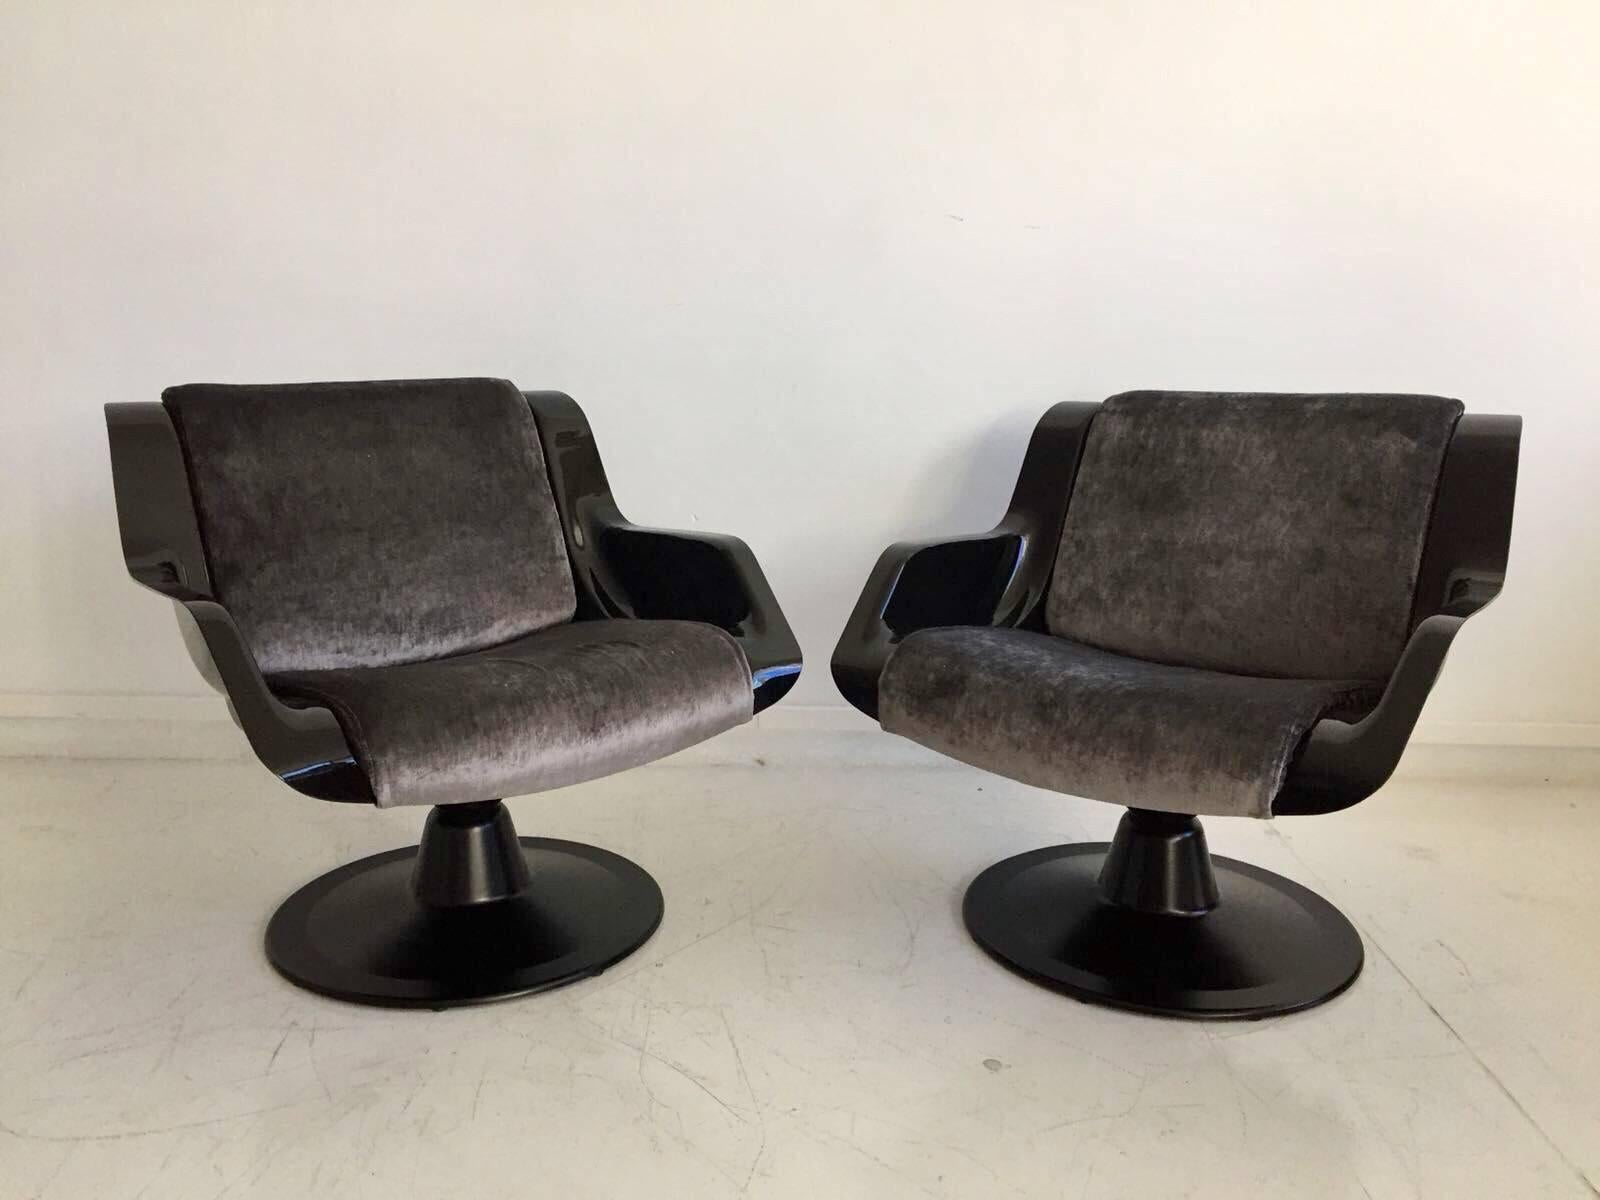 Pair of black armchairs, model 3814-1KF, by Finnish designer Yrjo Kukkapuro, produced by Haimi Finland, circa late 1960s. Seat shells made of black ABS plastic, newly upholstered with dark grey velvet fabric, aluminum rotation base. These chairs